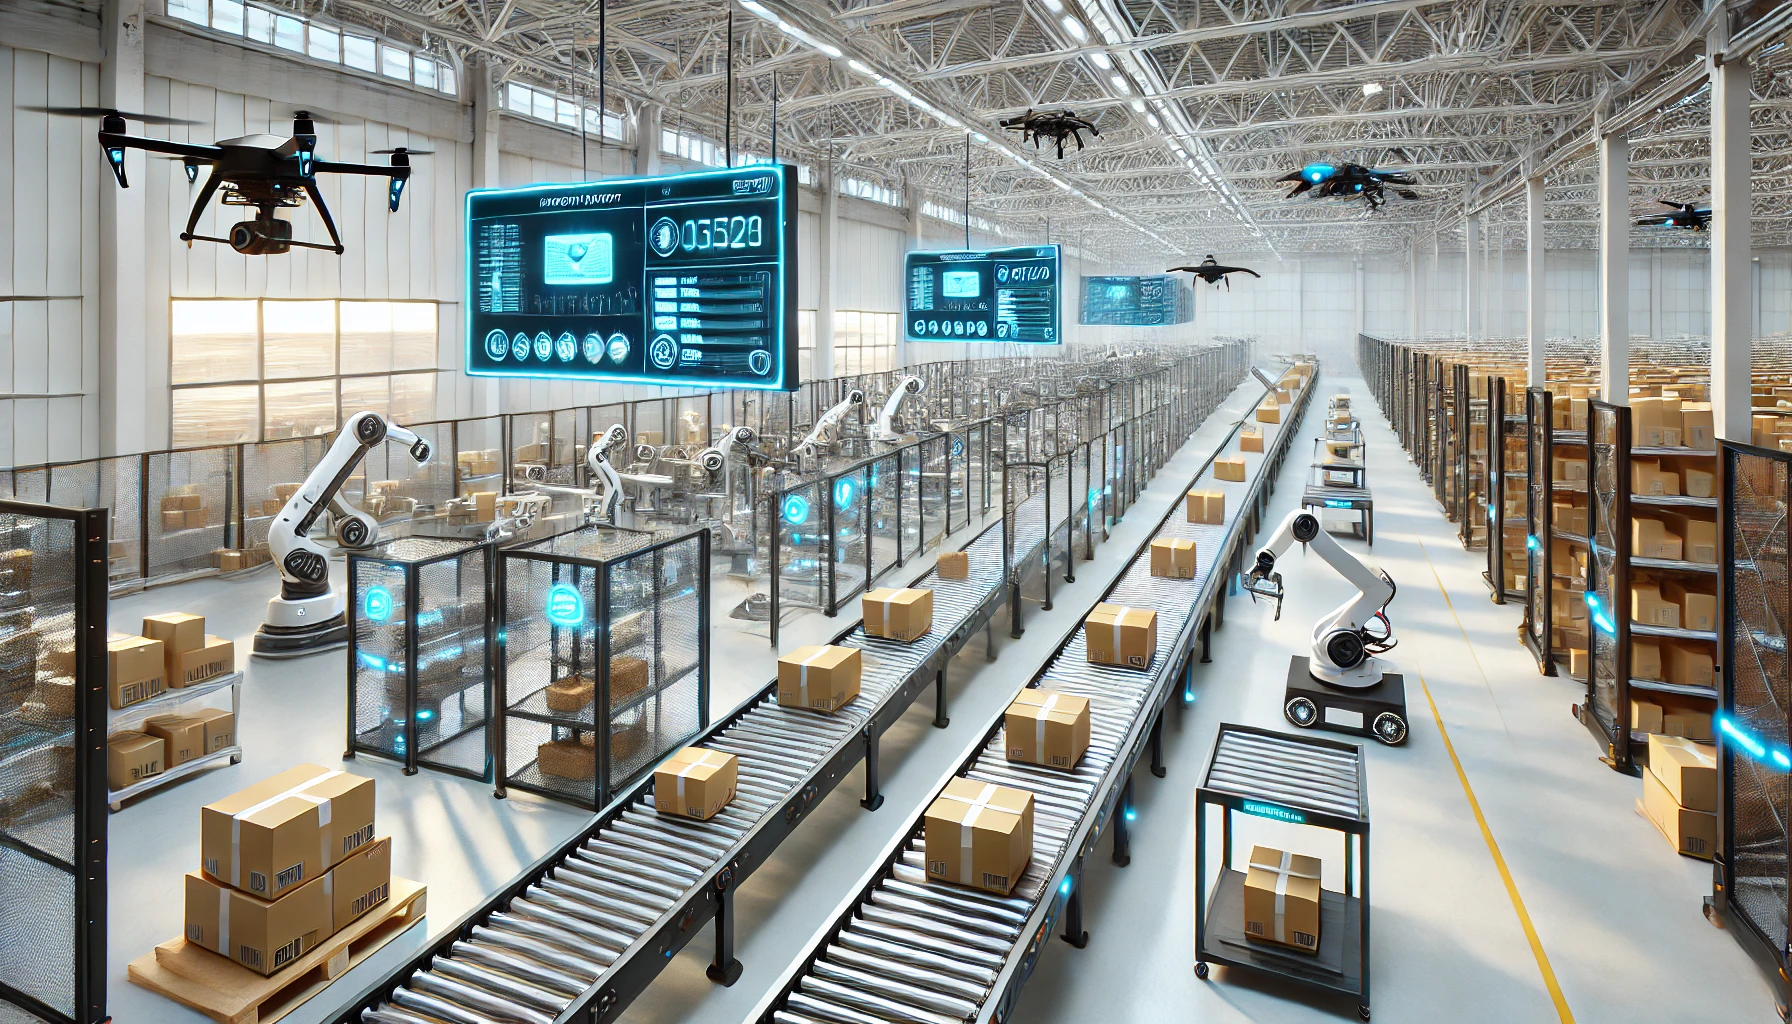 A high-tech logistics warehouse interior featuring automated systems. The scene includes conveyor belts, robotic arms, and drones efficiently managing